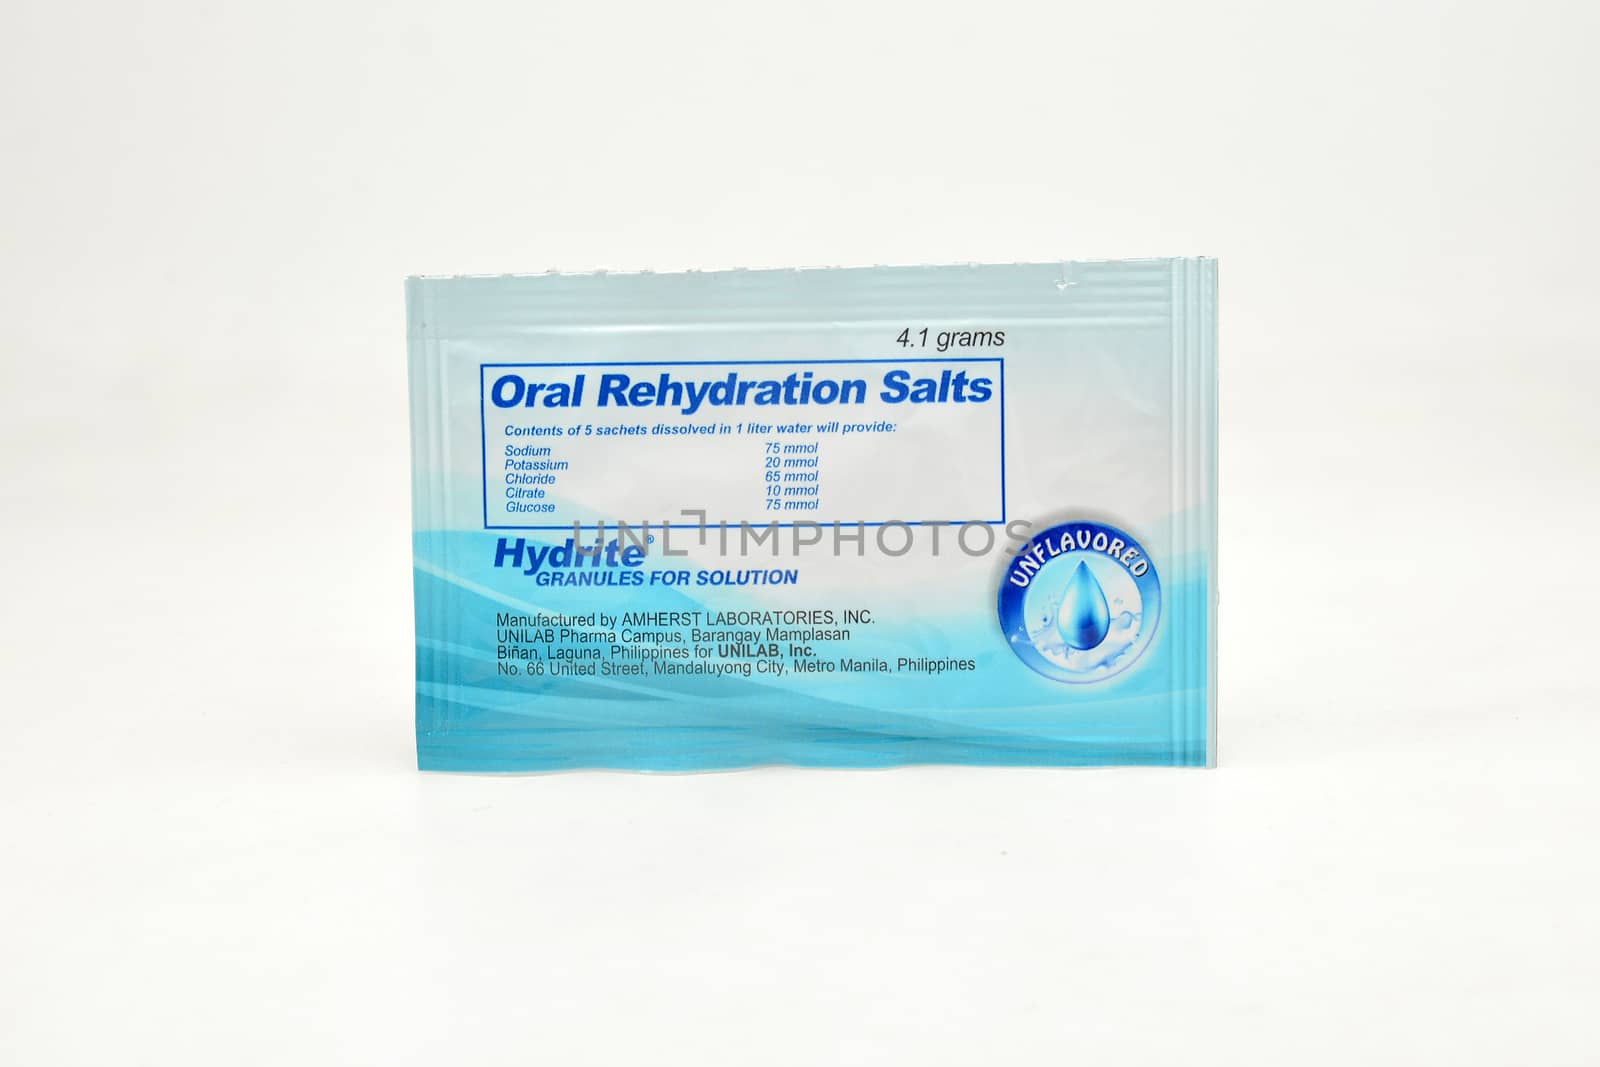 MANILA, PH - SEPT 10 - Oral rehydration salts hydrite on September 10, 2020 in Manila, Philippines.